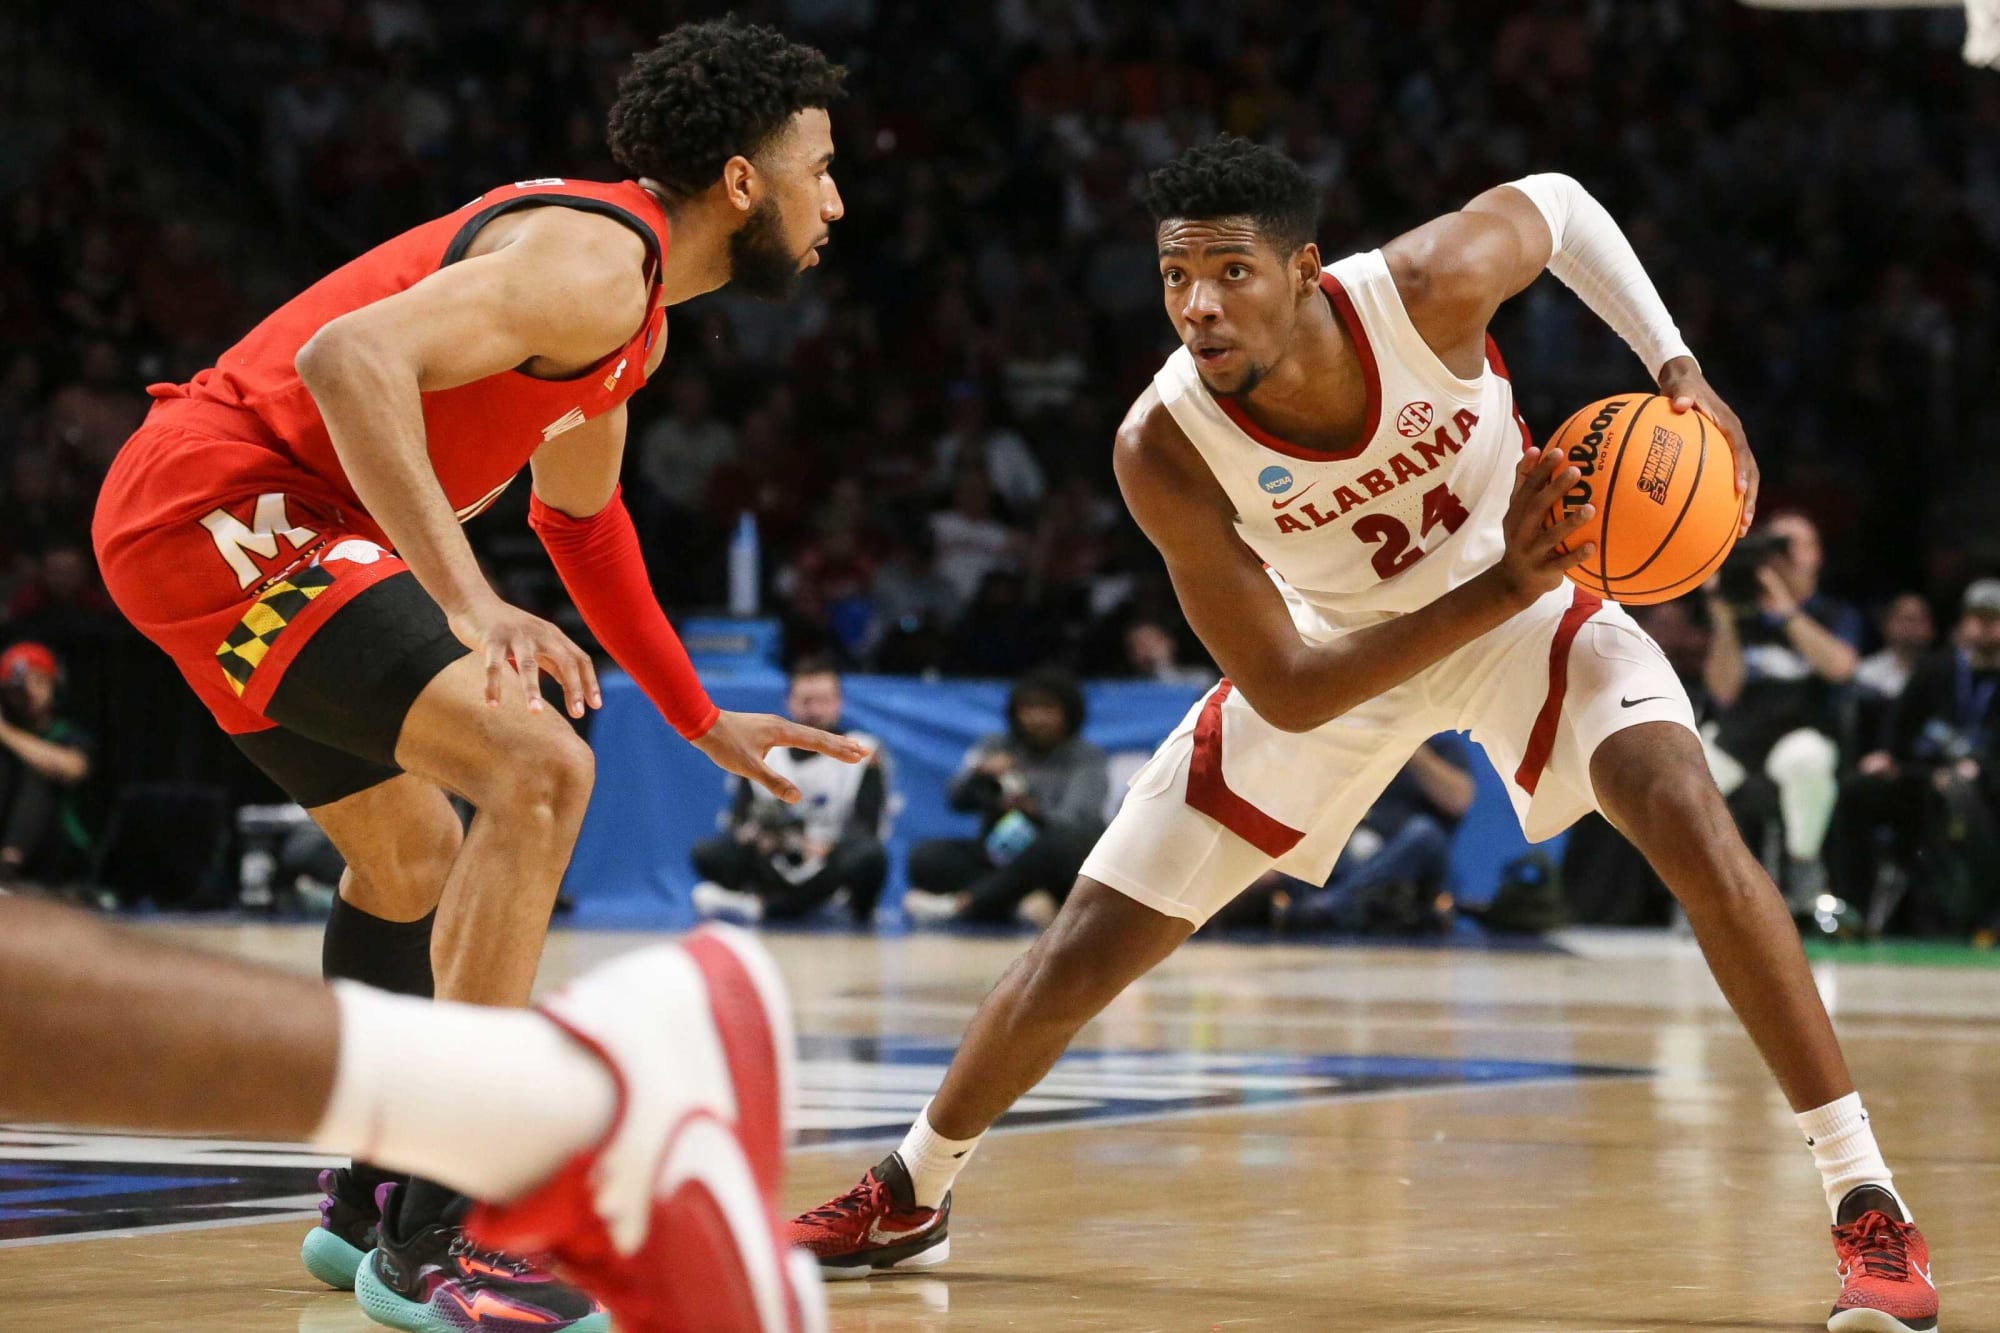 Alabama’s latest odds to win March Madness after advancing to Sweet 16